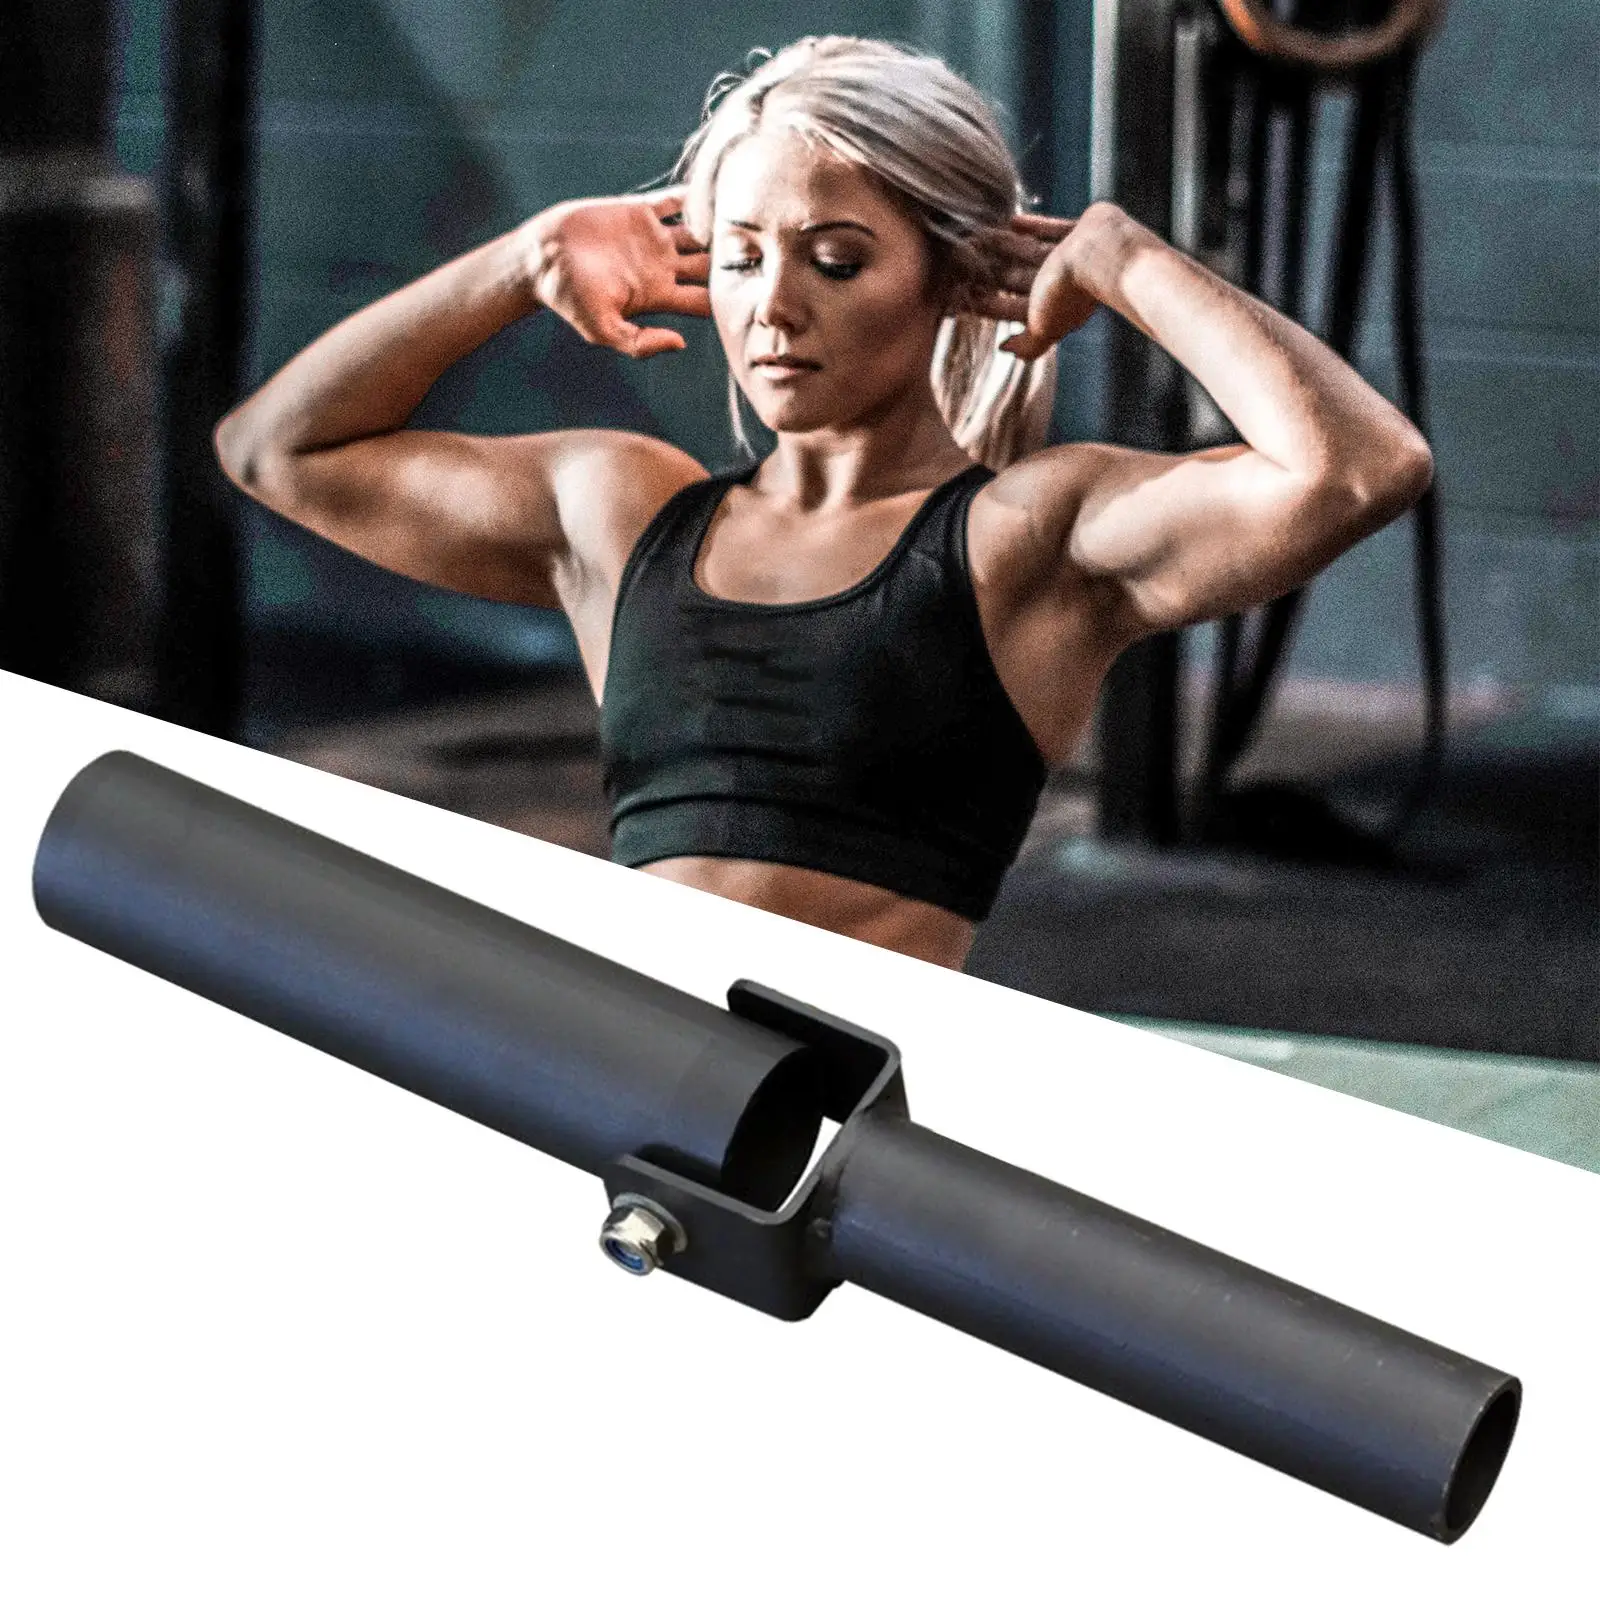 Portable T Bar Row Attachment Barbell Attachment Easy to Install Barbell Barrel Rack for Workout Strength Training Equipment